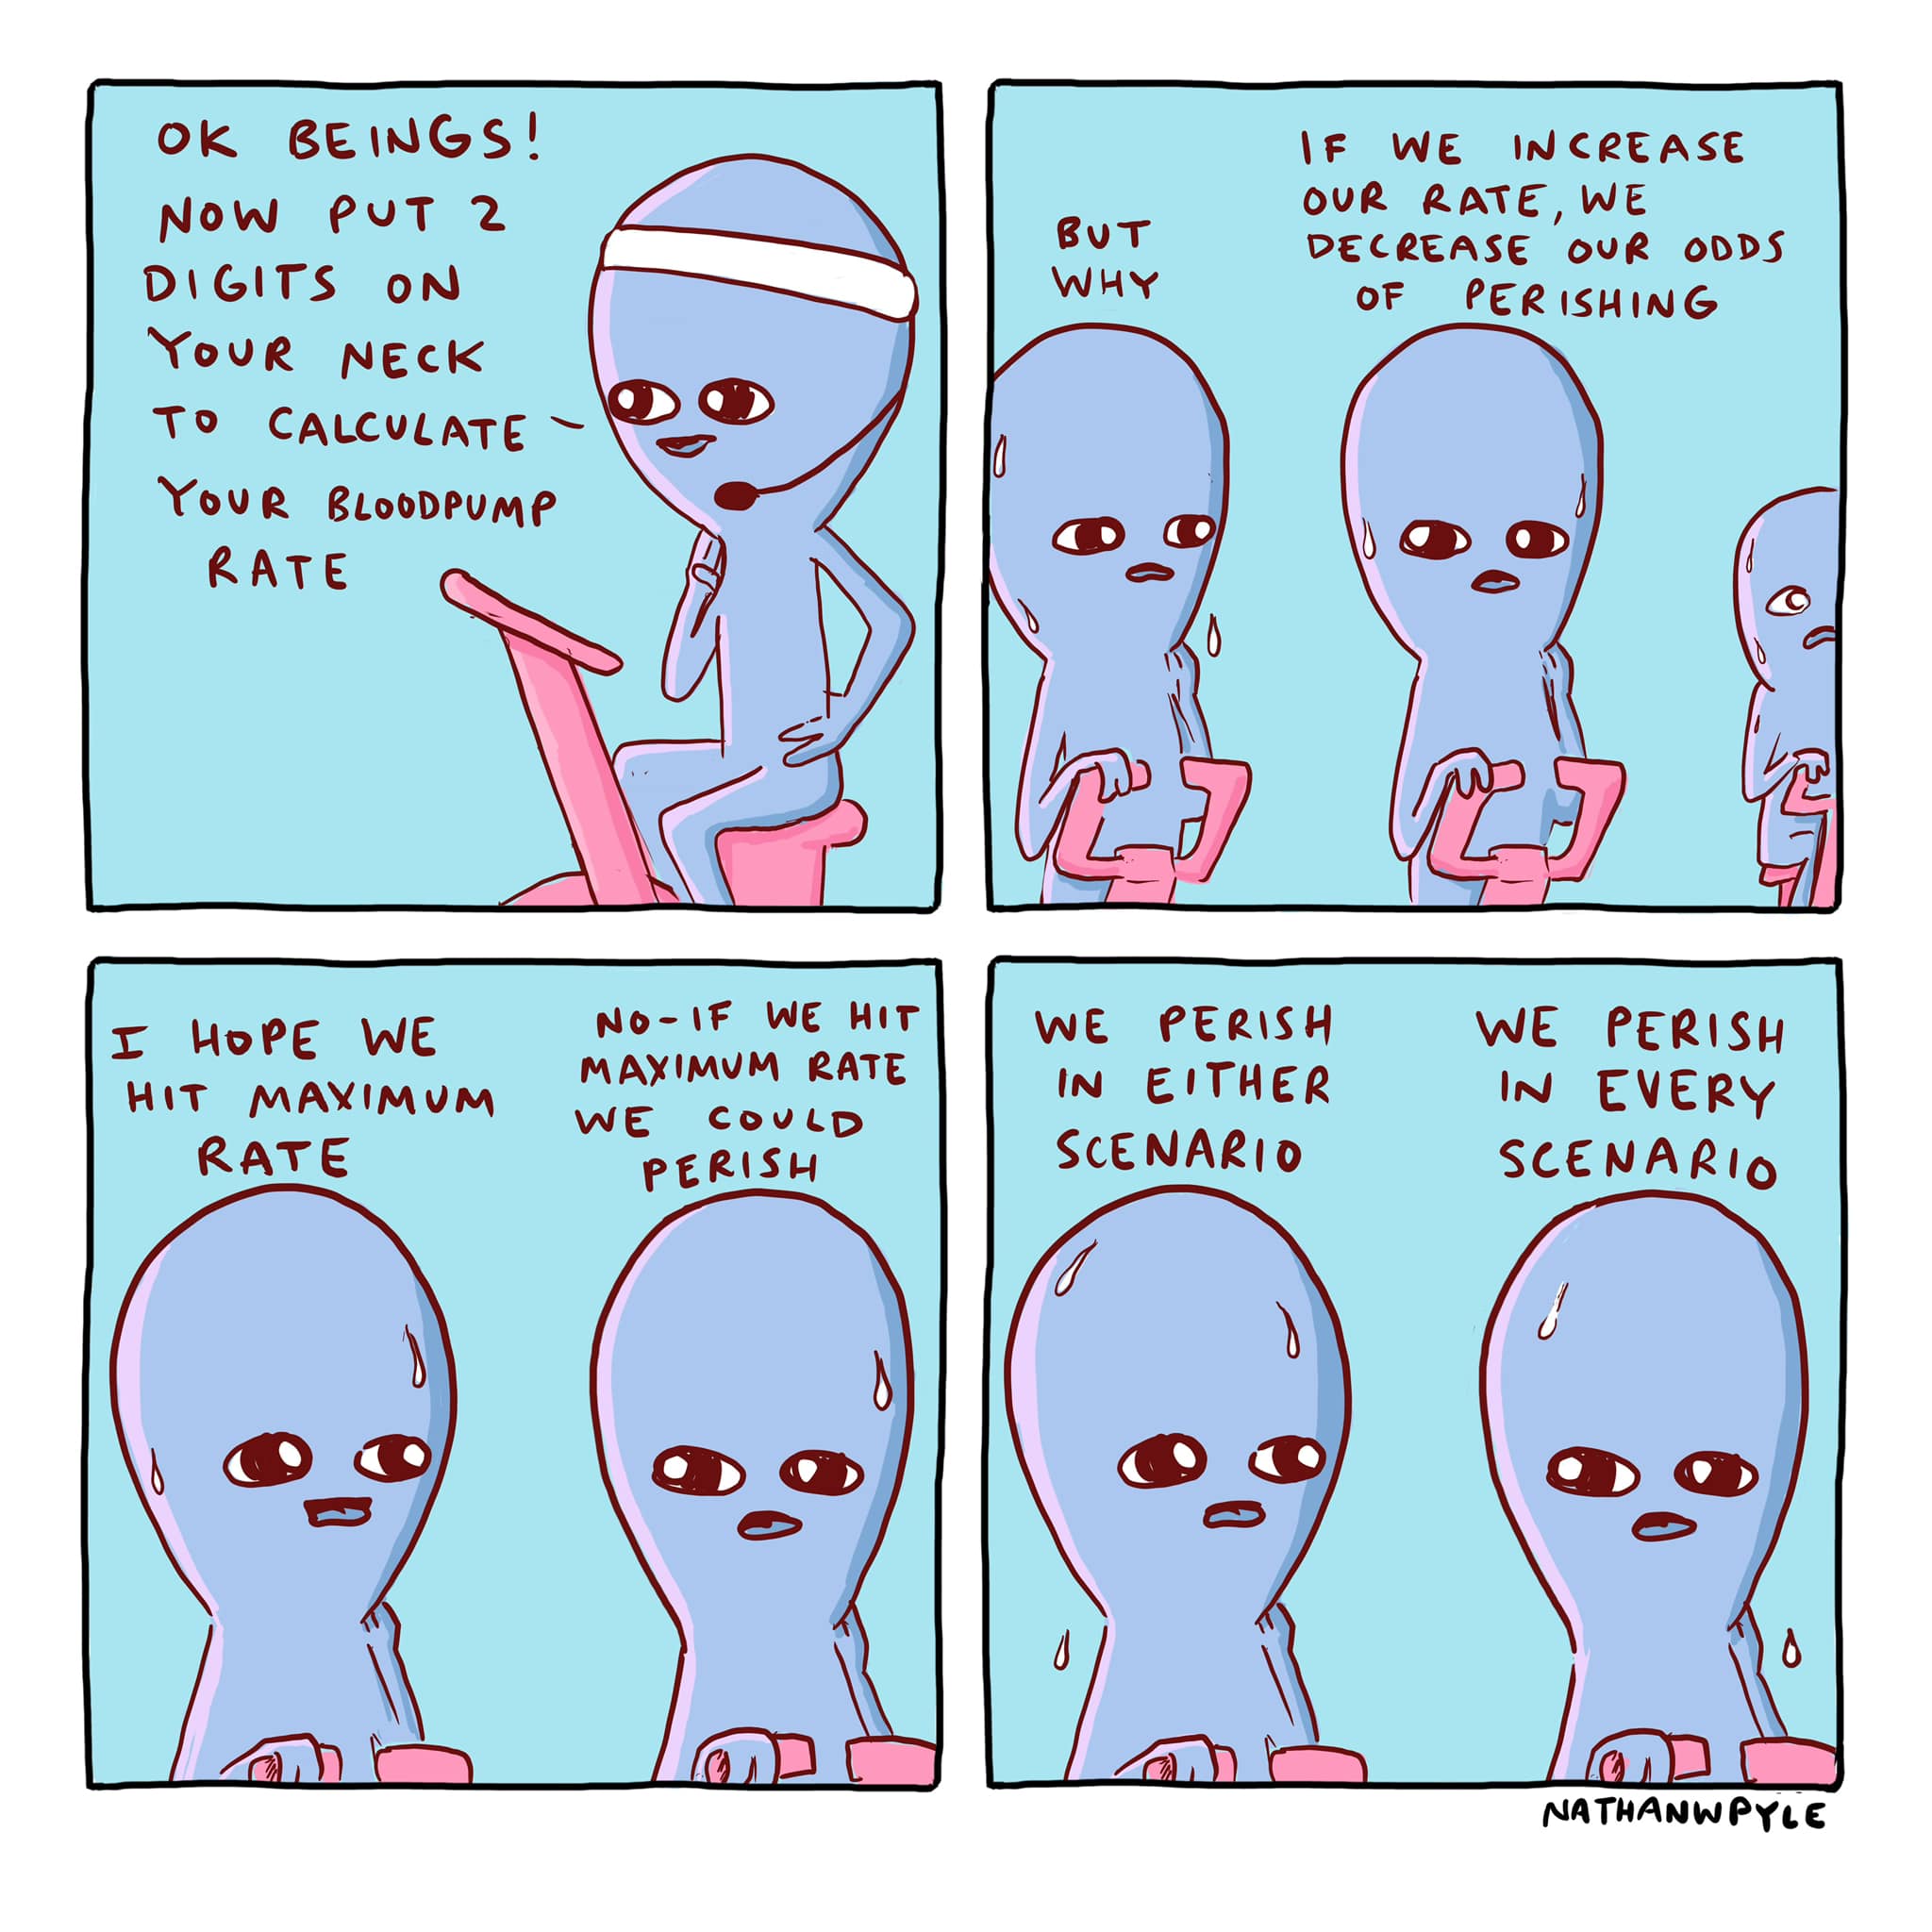 put two digits on your neck to calculate your bloodpump rate, if we increase our rate, we decrease our odds of perishing, i hope we hit maximum rate, if we hit maximum rate we could perish, we perish in every scenario, nathanwpyle